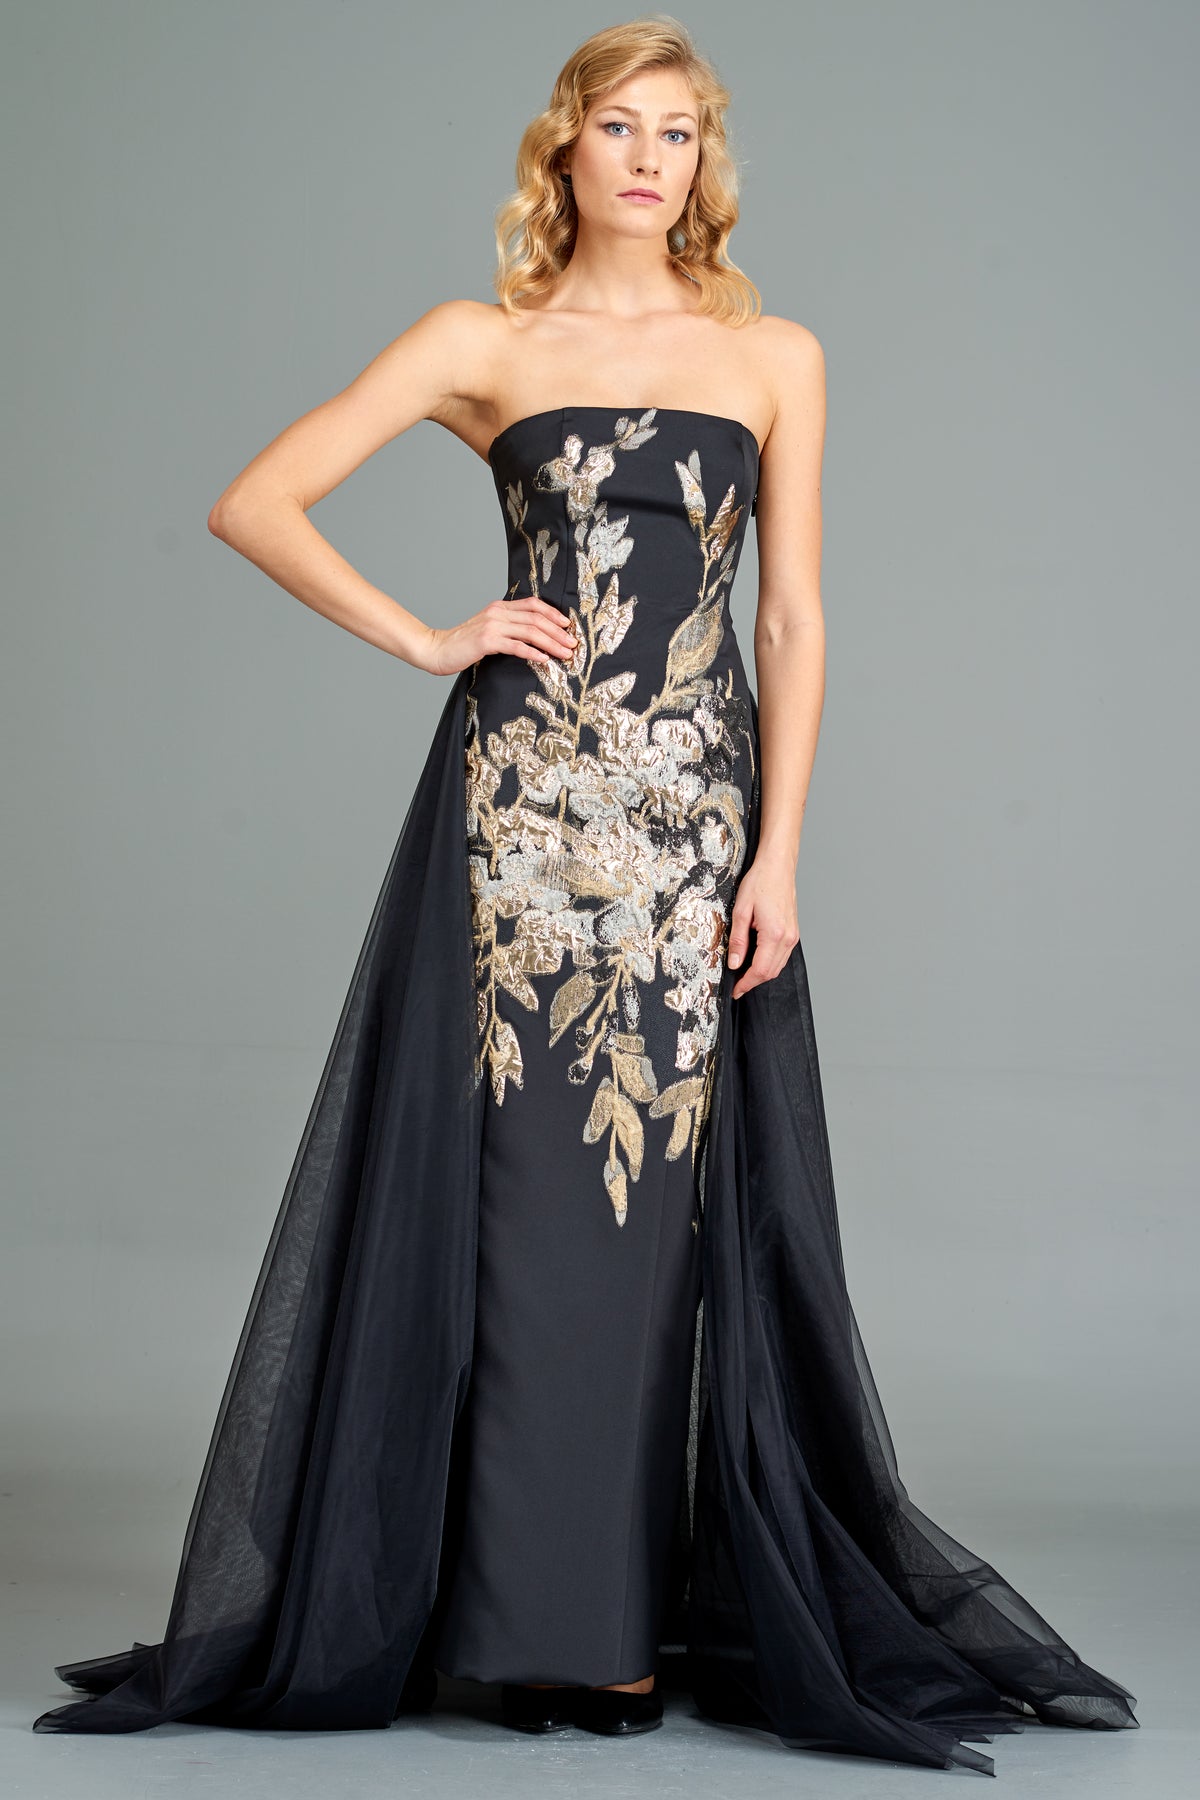 Structured Floral Jacquard Gown – John Paul Ataker